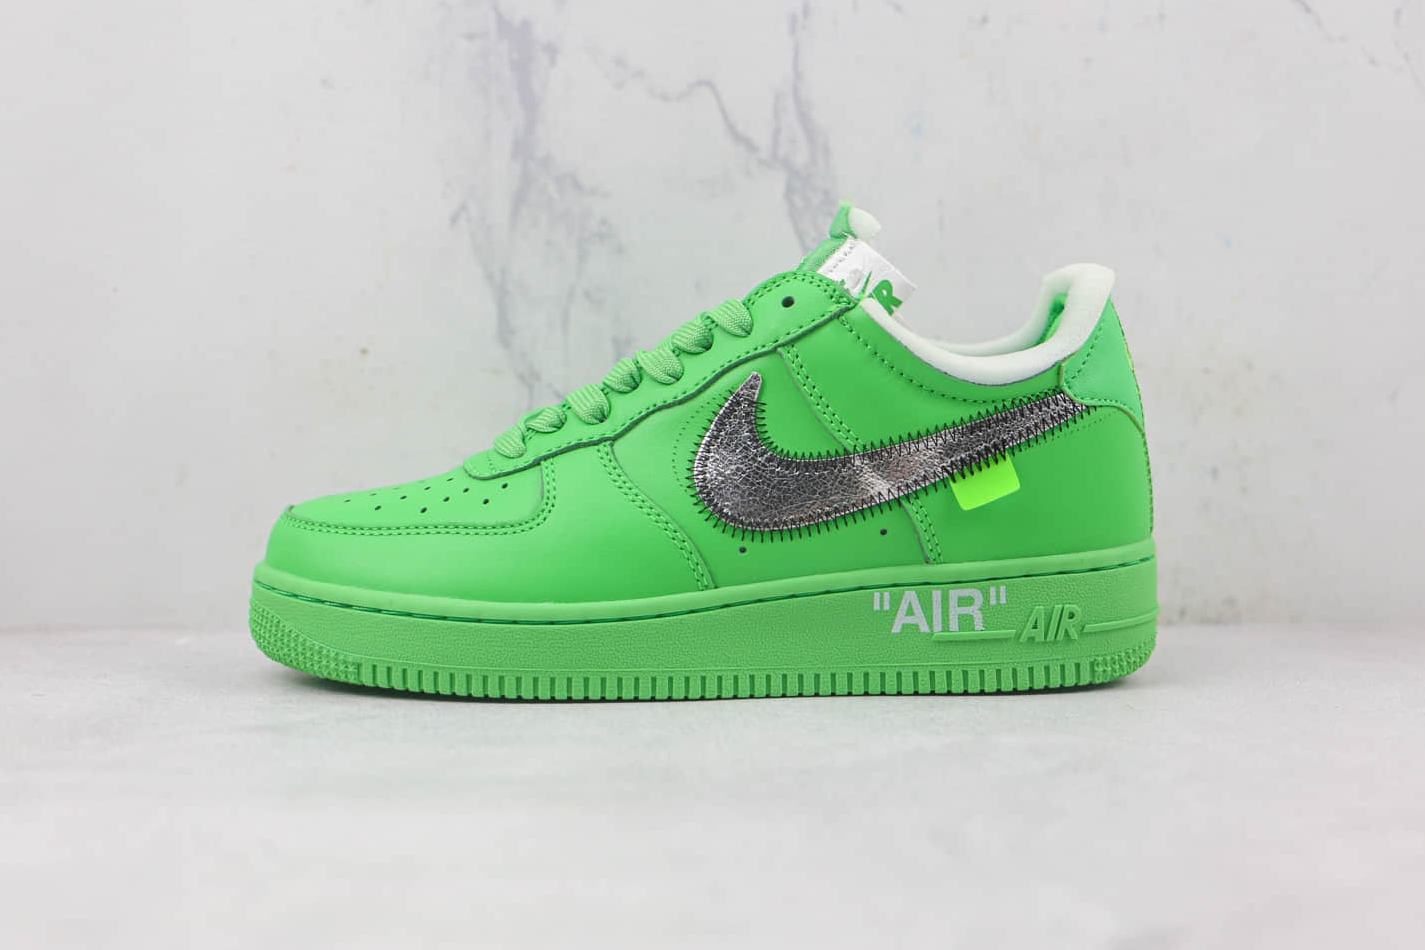 Nike Off-White x Air Force 1 Low 'Brooklyn' DX1419-300 - Stylish Collaboration Sneakers